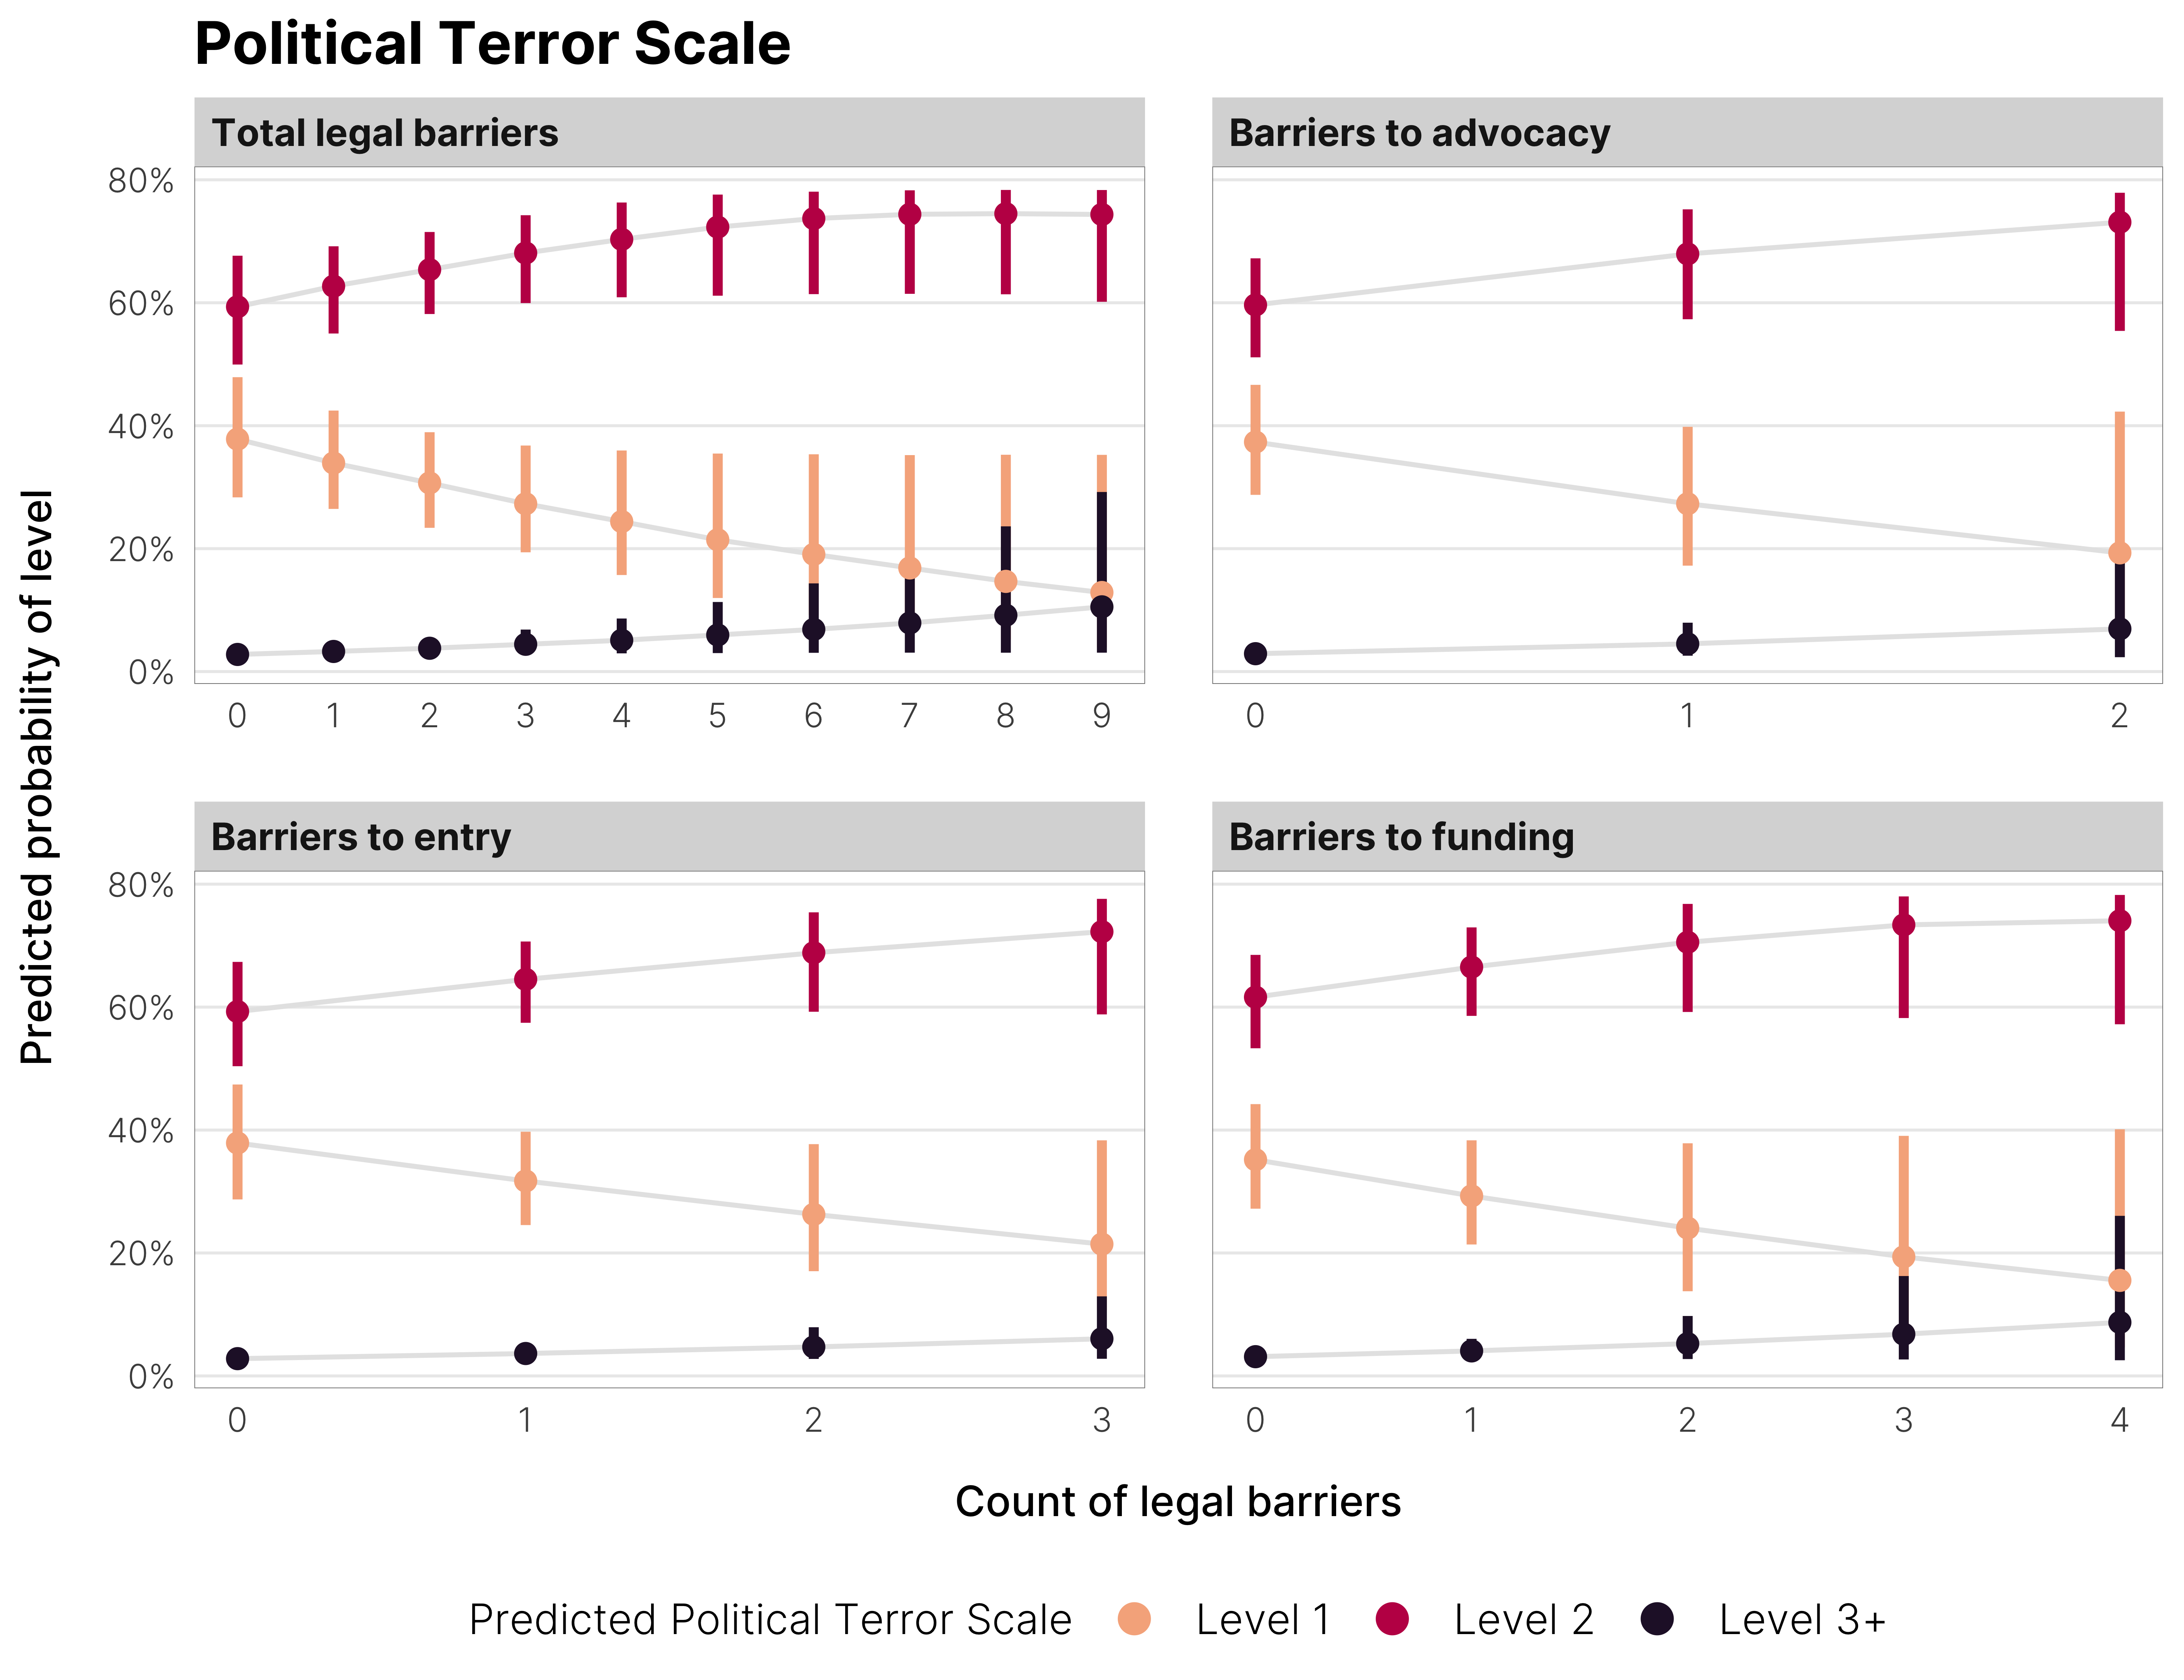 Marginal effects of increasing anti-NGO legal barriers on the probability of specific levels of political terror